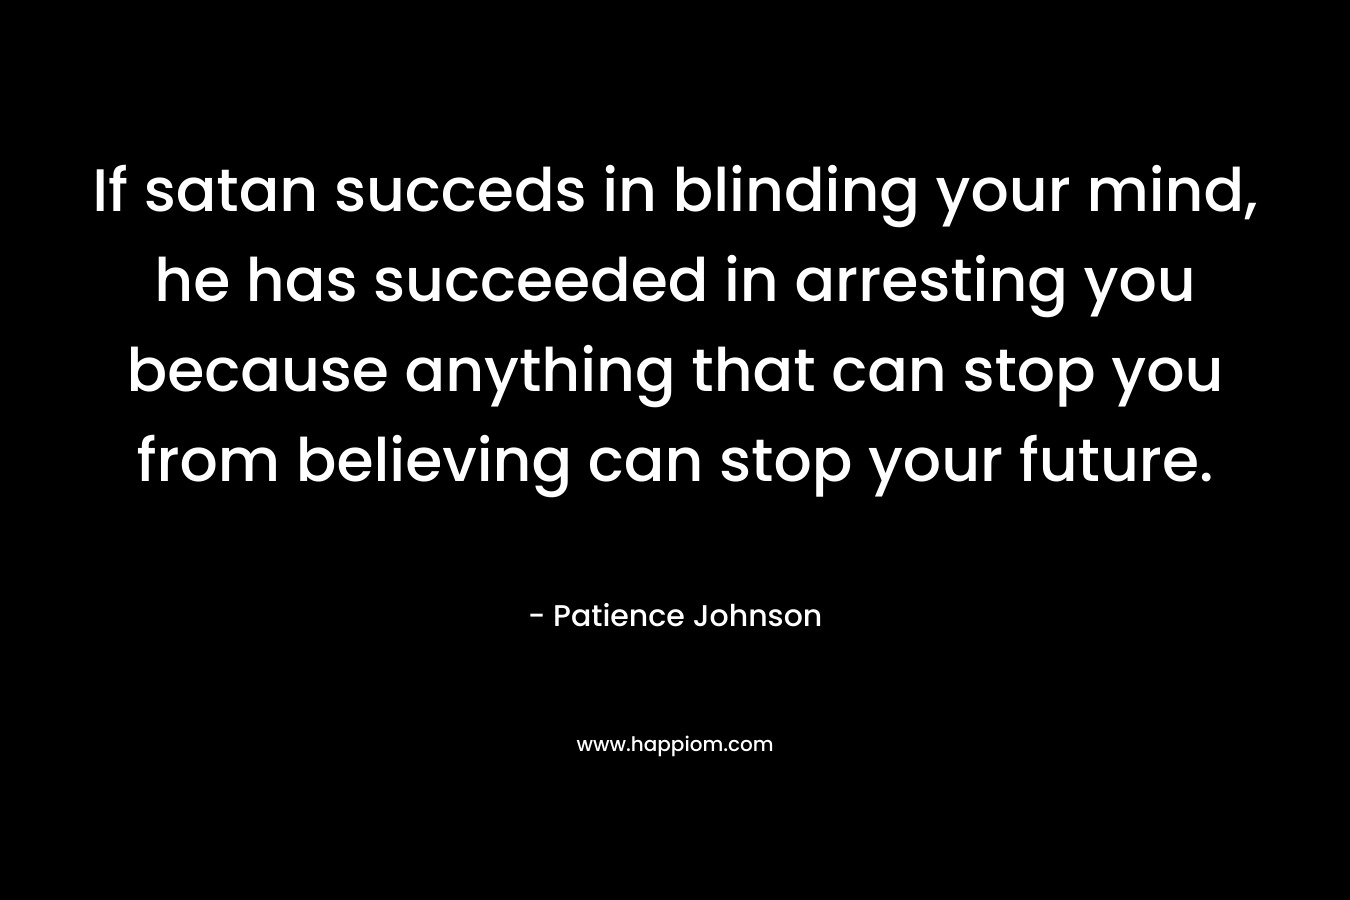 If satan succeds in blinding your mind, he has succeeded in arresting you because anything that can stop you from believing can stop your future. – Patience Johnson